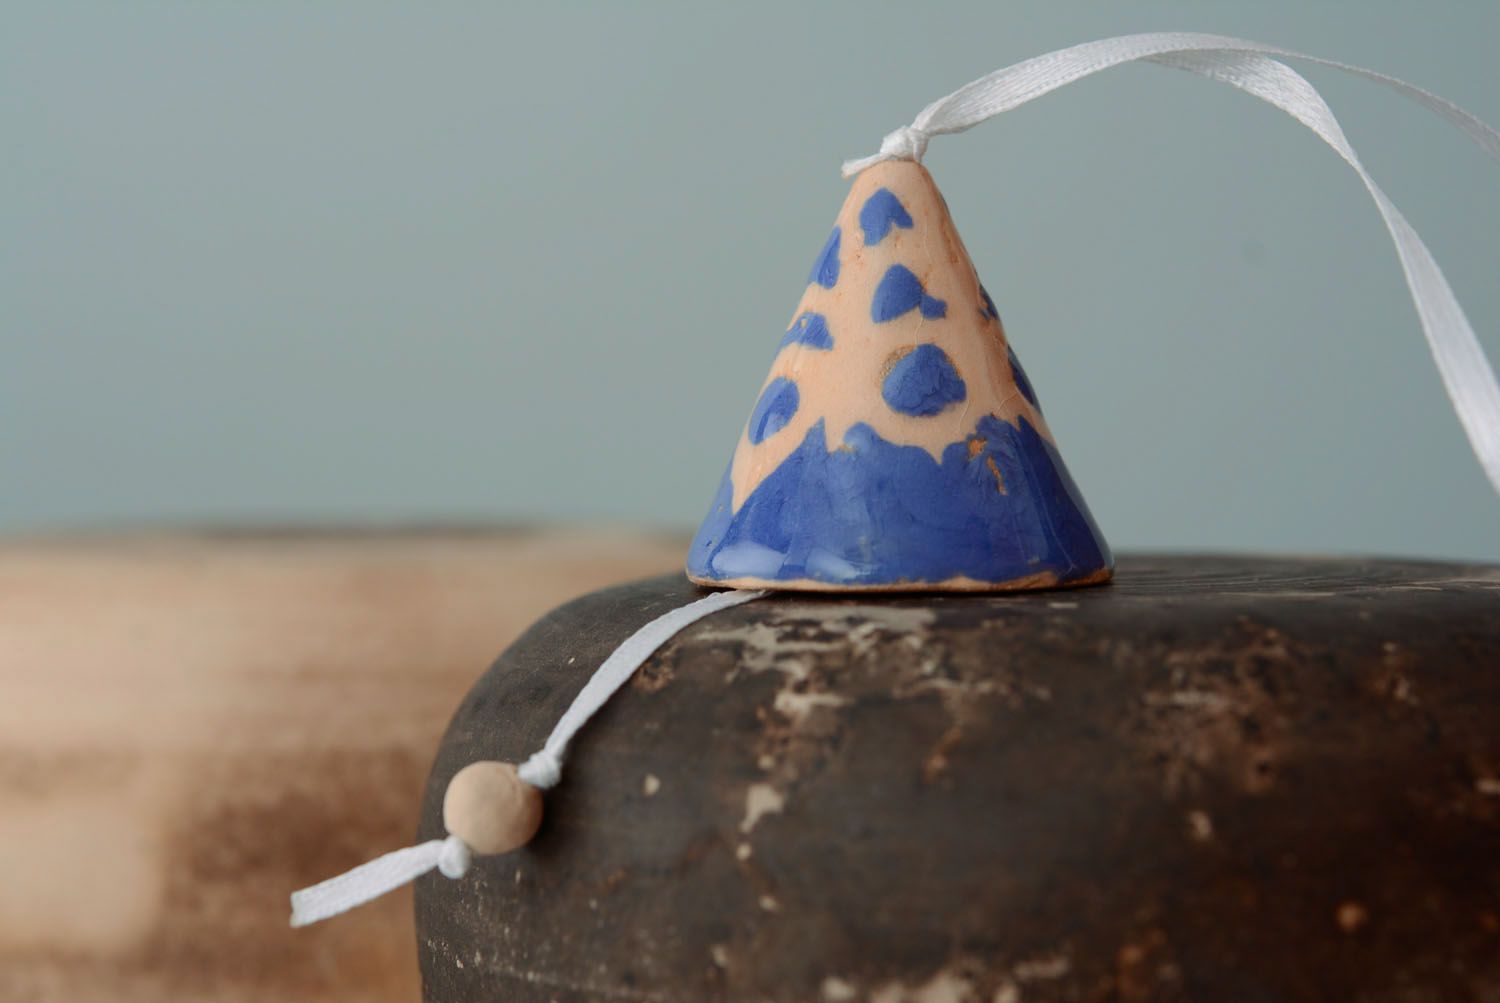 Painted clay bell photo 1